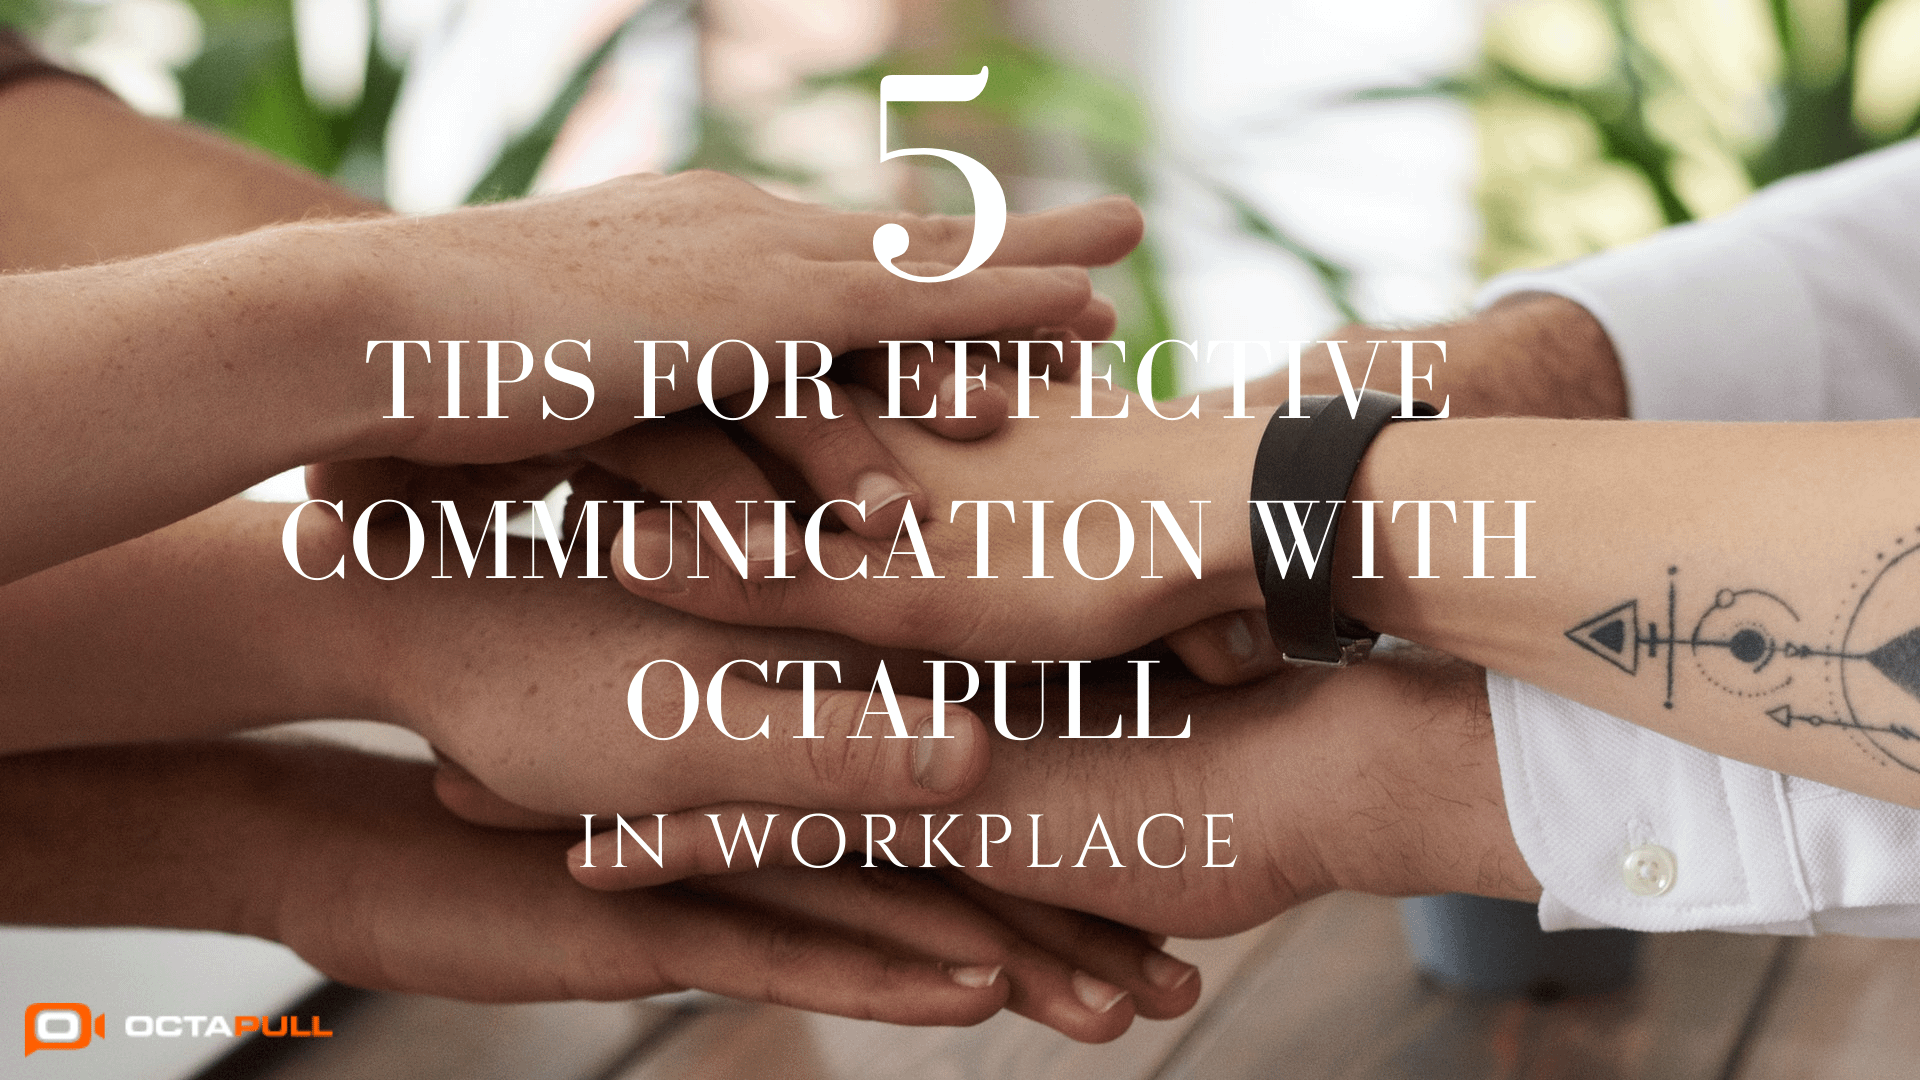 5 Tips For Effective Communication In Workplace With OCTAPULL